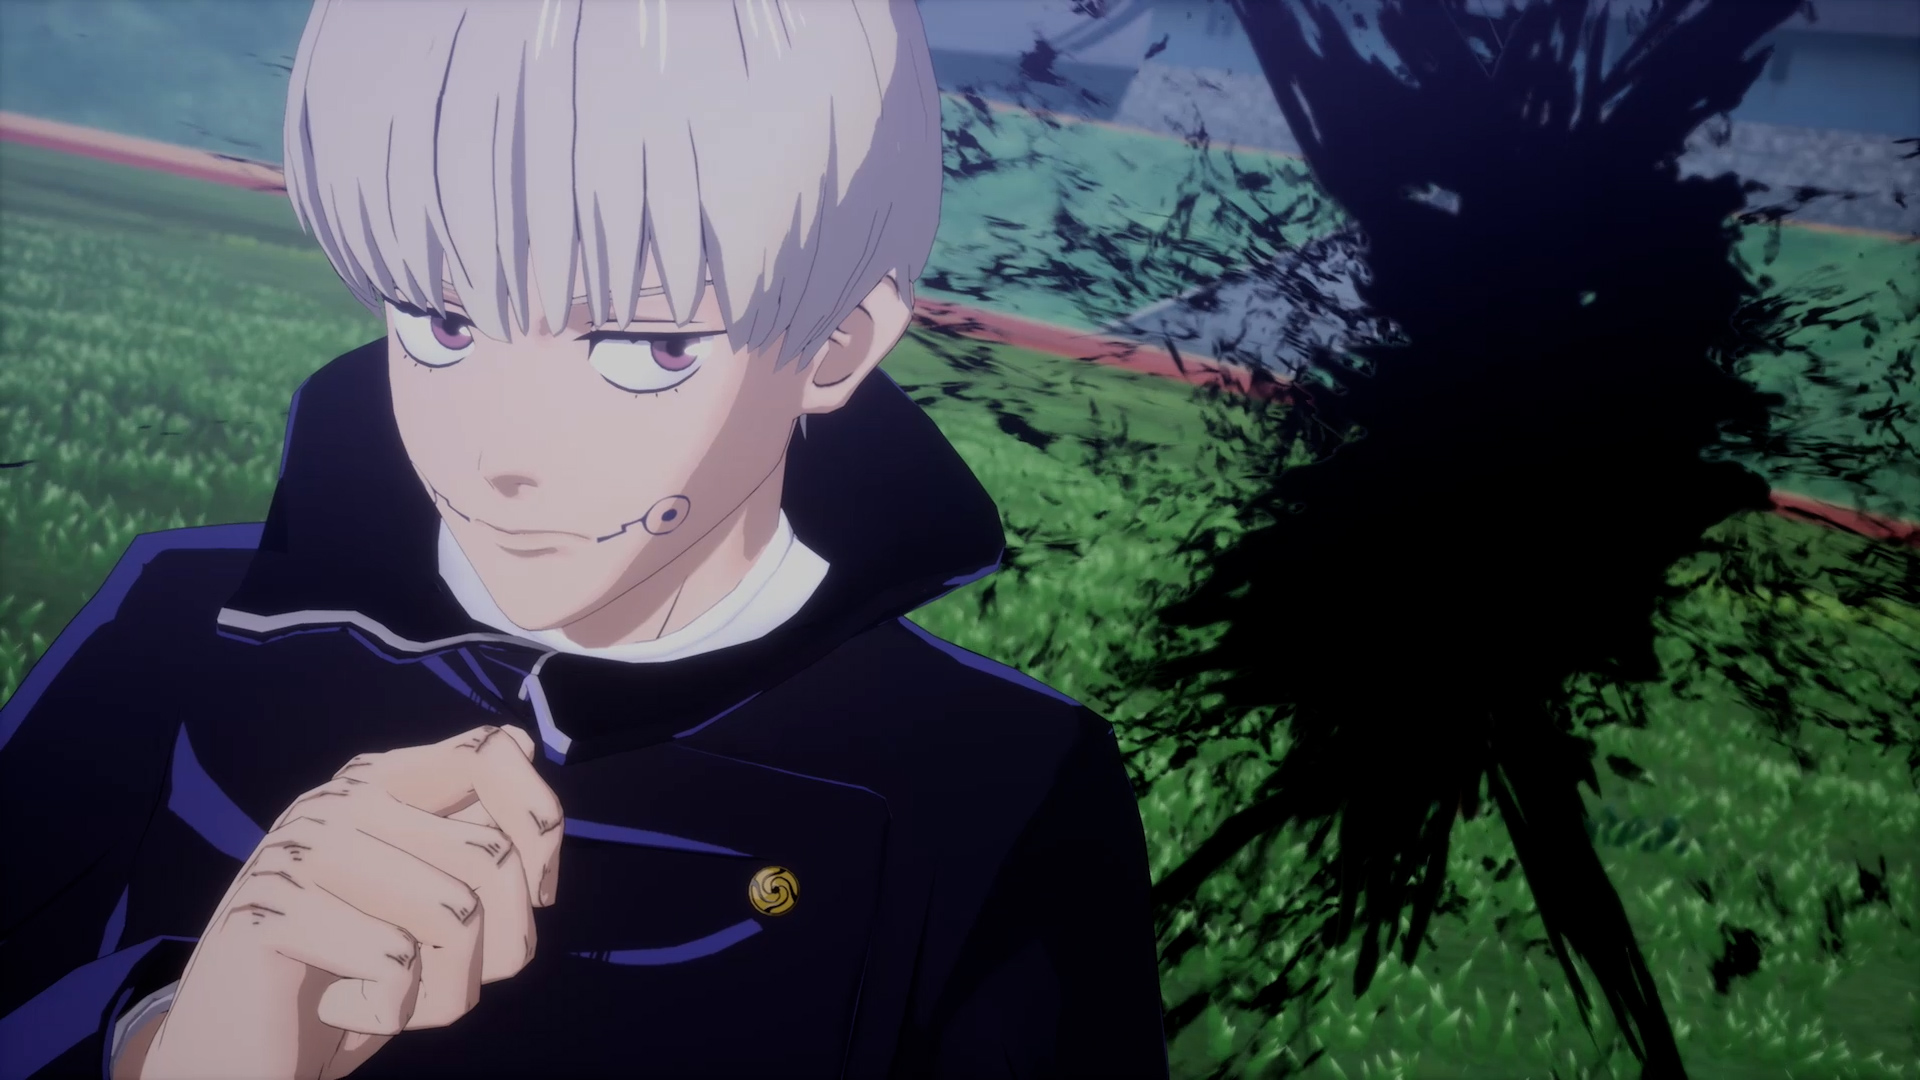 Jujutsu Kaisen Cursed Clash's 2nd Character Trailer Previews the  Second-Years